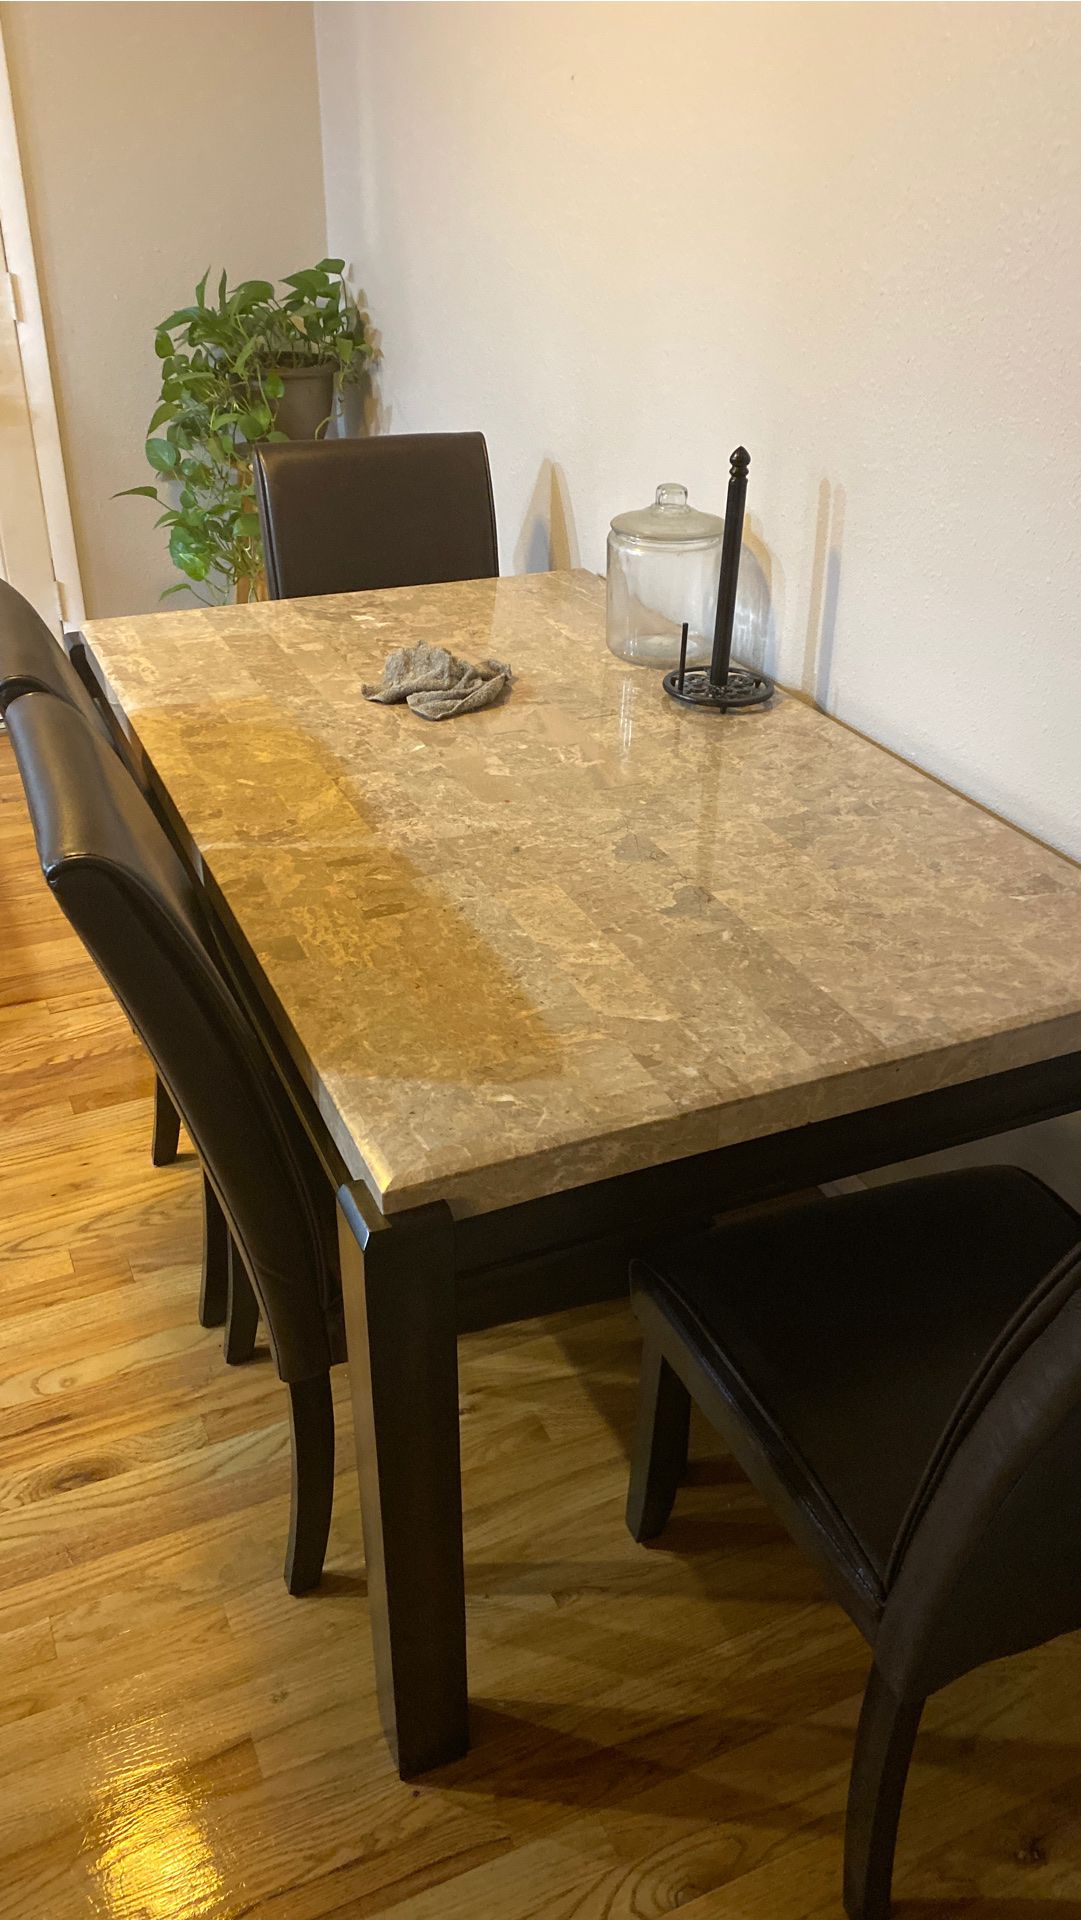 Granite Kitchen Table with 4 chairs